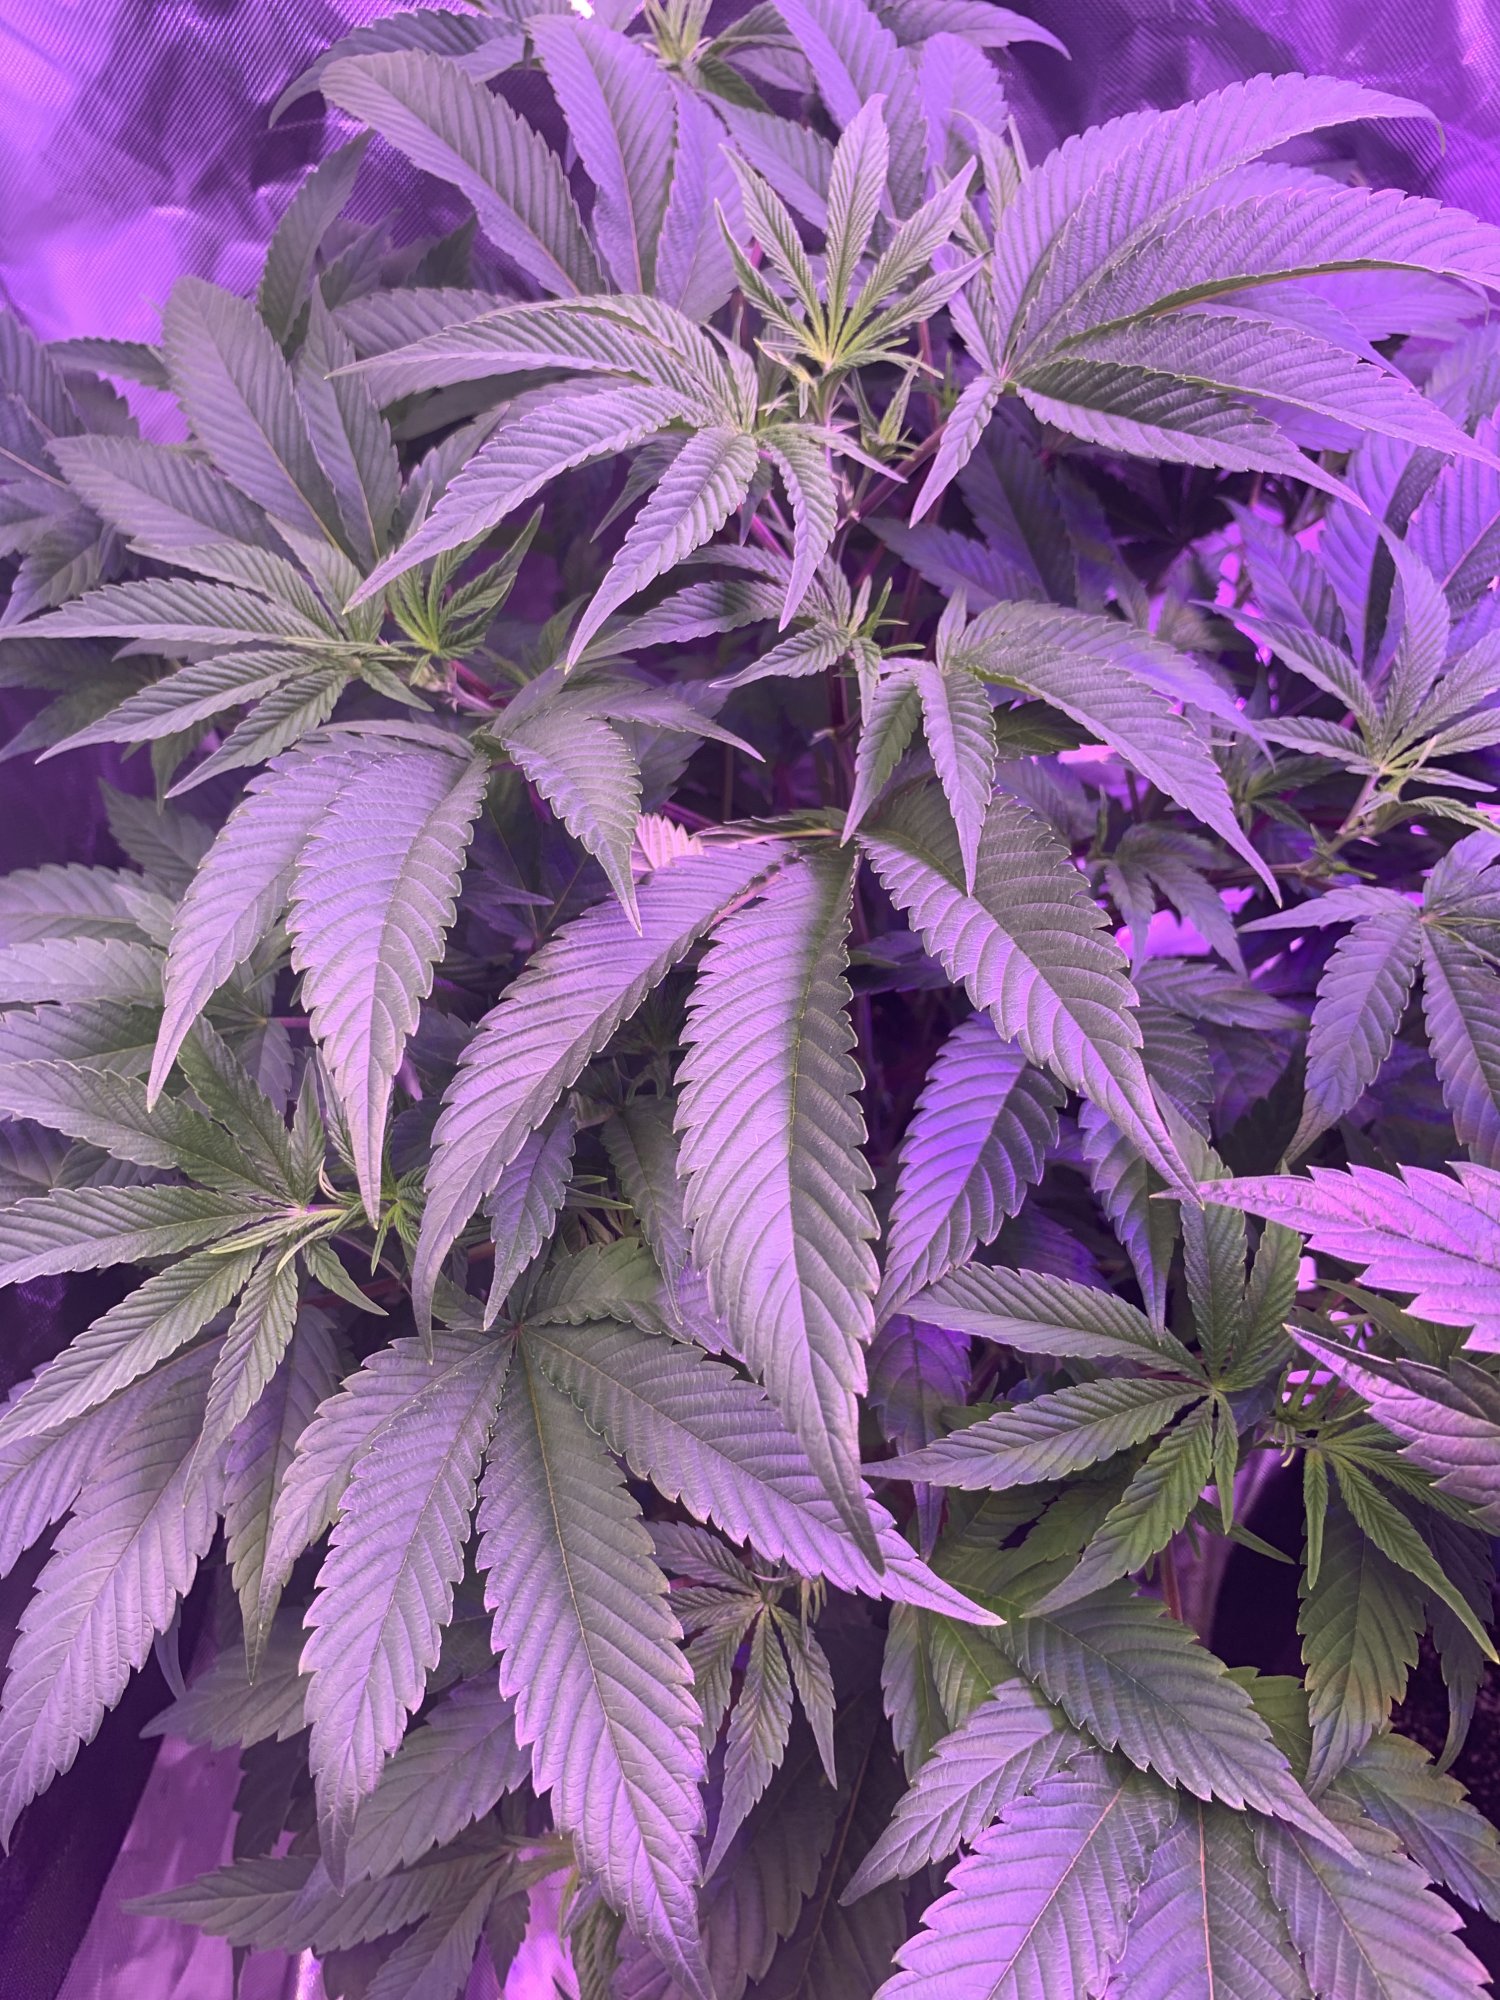 Newbie and 1st time grower